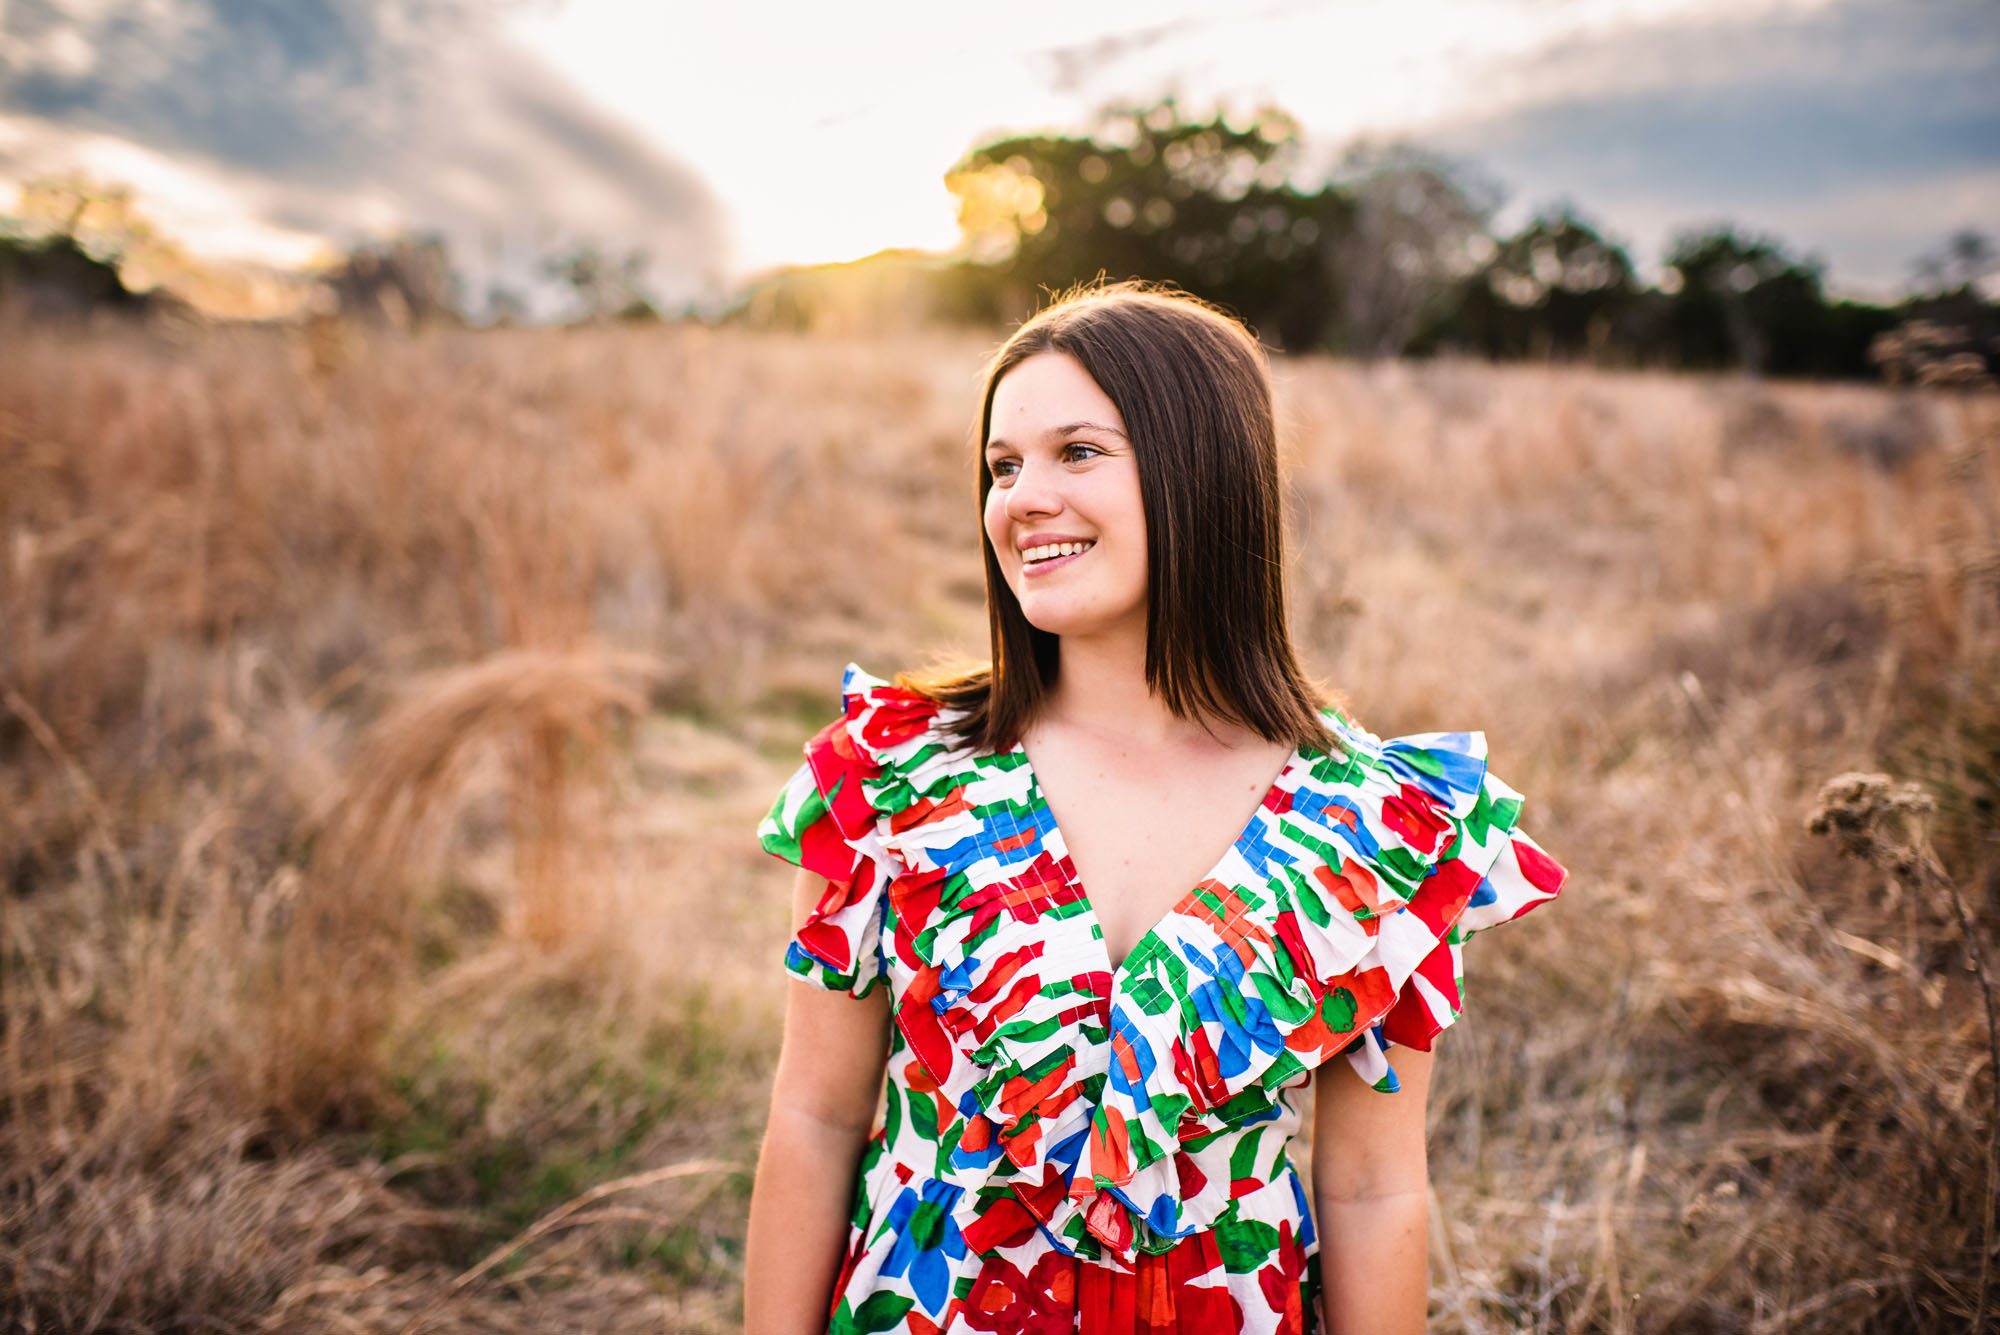 Senior girl in a brightly colored top in a field at sunset, San Antonio senior photographer